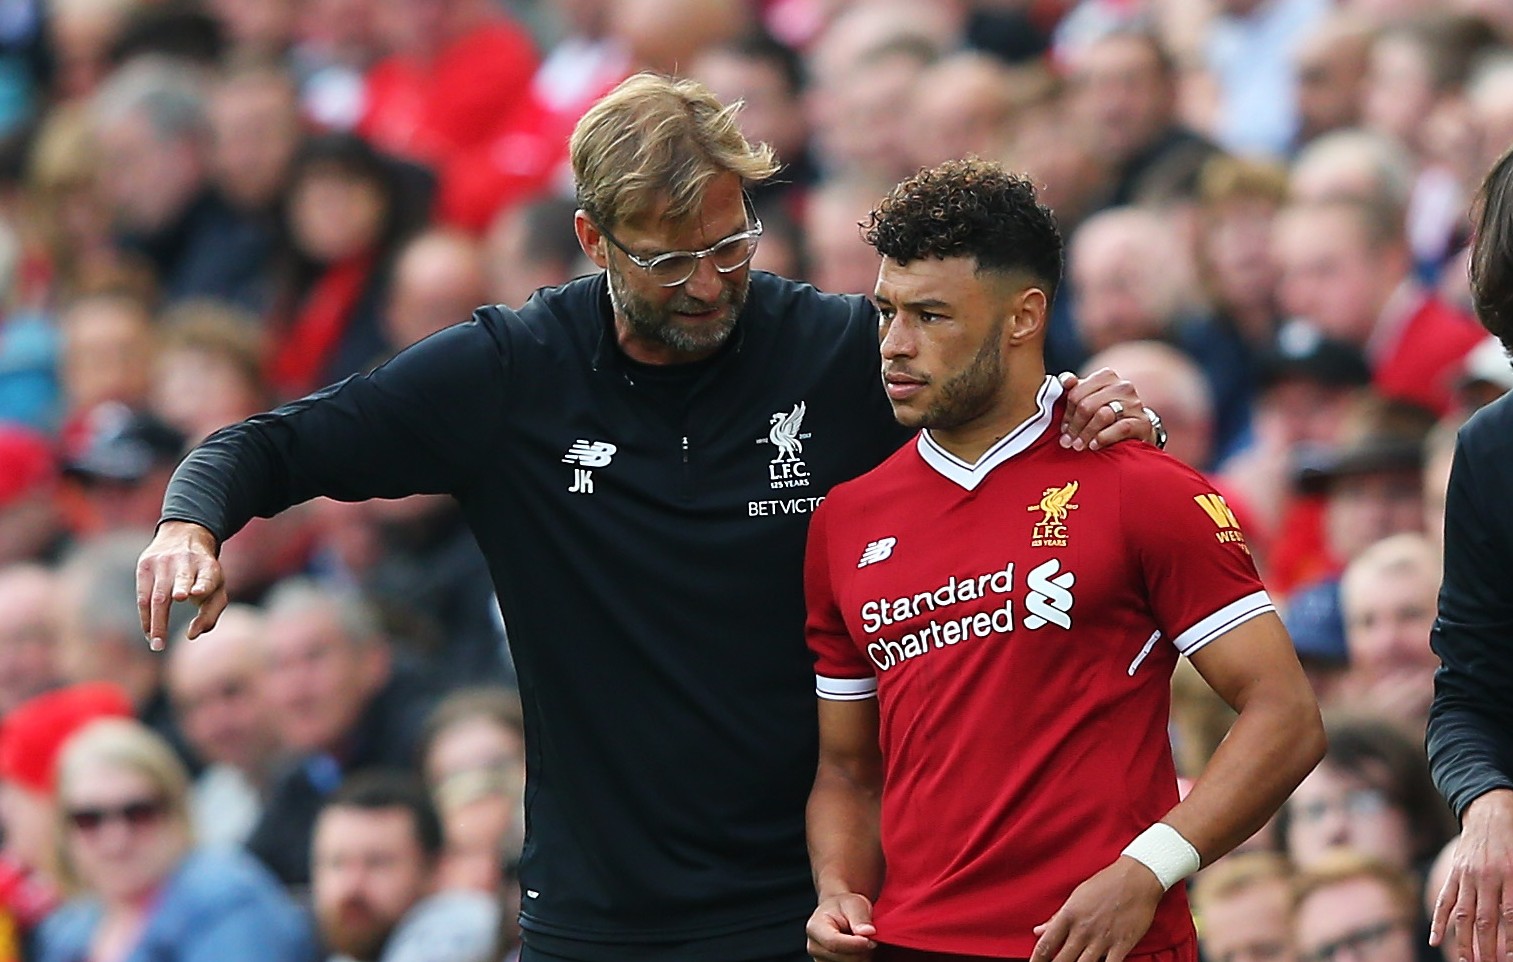 LIVERPOOL, ENGLAND - SEPTEMBER 16: Jurgen Klopp, Manager of Liverpool speaks to Alex Oxlade-Chamberlain of Liverpool before he comes on during the Premier League match between Liverpool and Burnley at Anfield on September 16, 2017 in Liverpool, England.  (Photo by Alex Livesey/Getty Images)